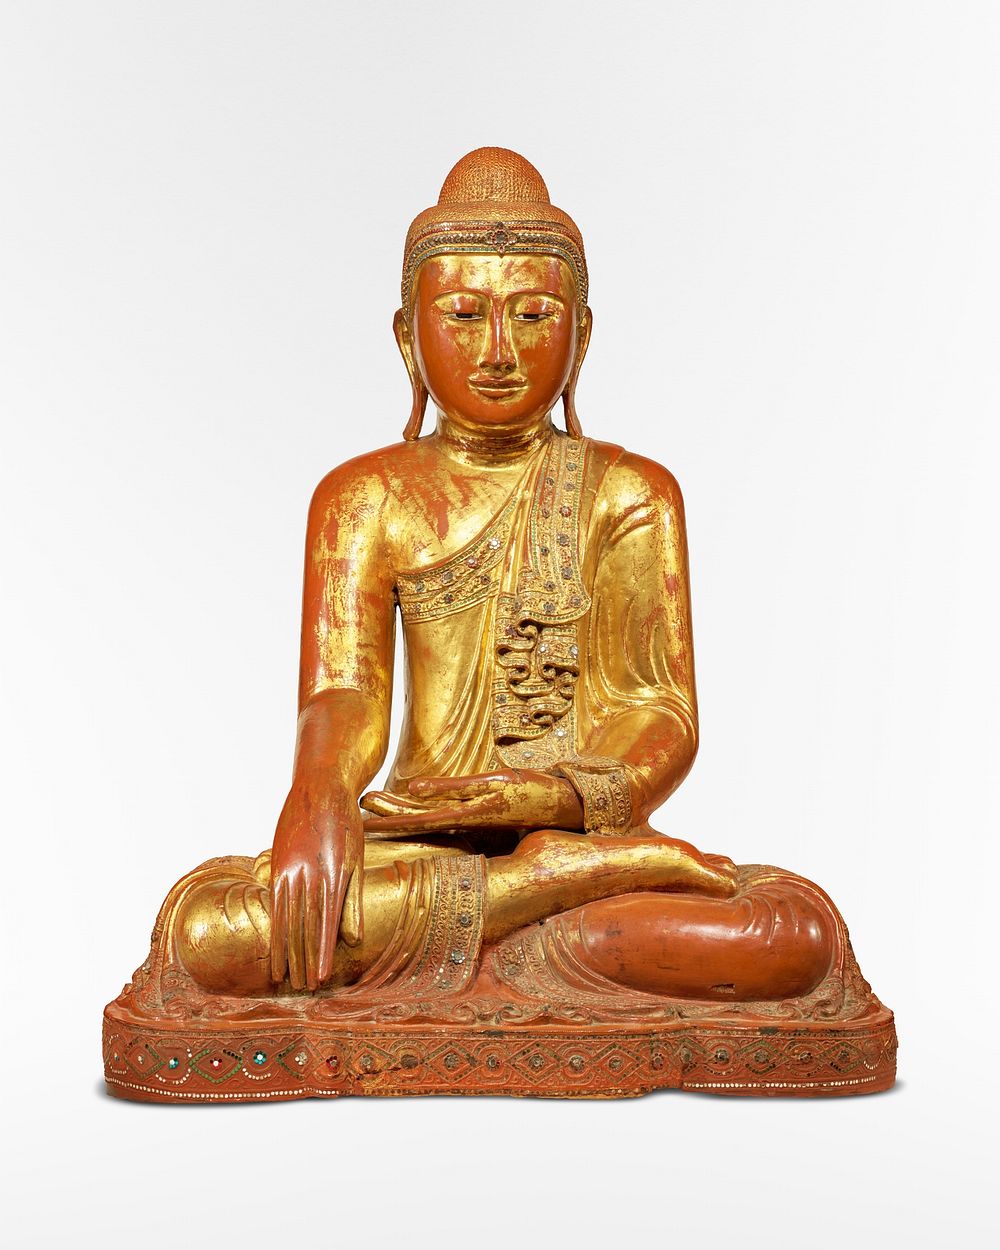 Enshrined Buddha (1850). Original public domain image from The Minneapolis Institute of Art. Digitally enhanced by rawpixel.